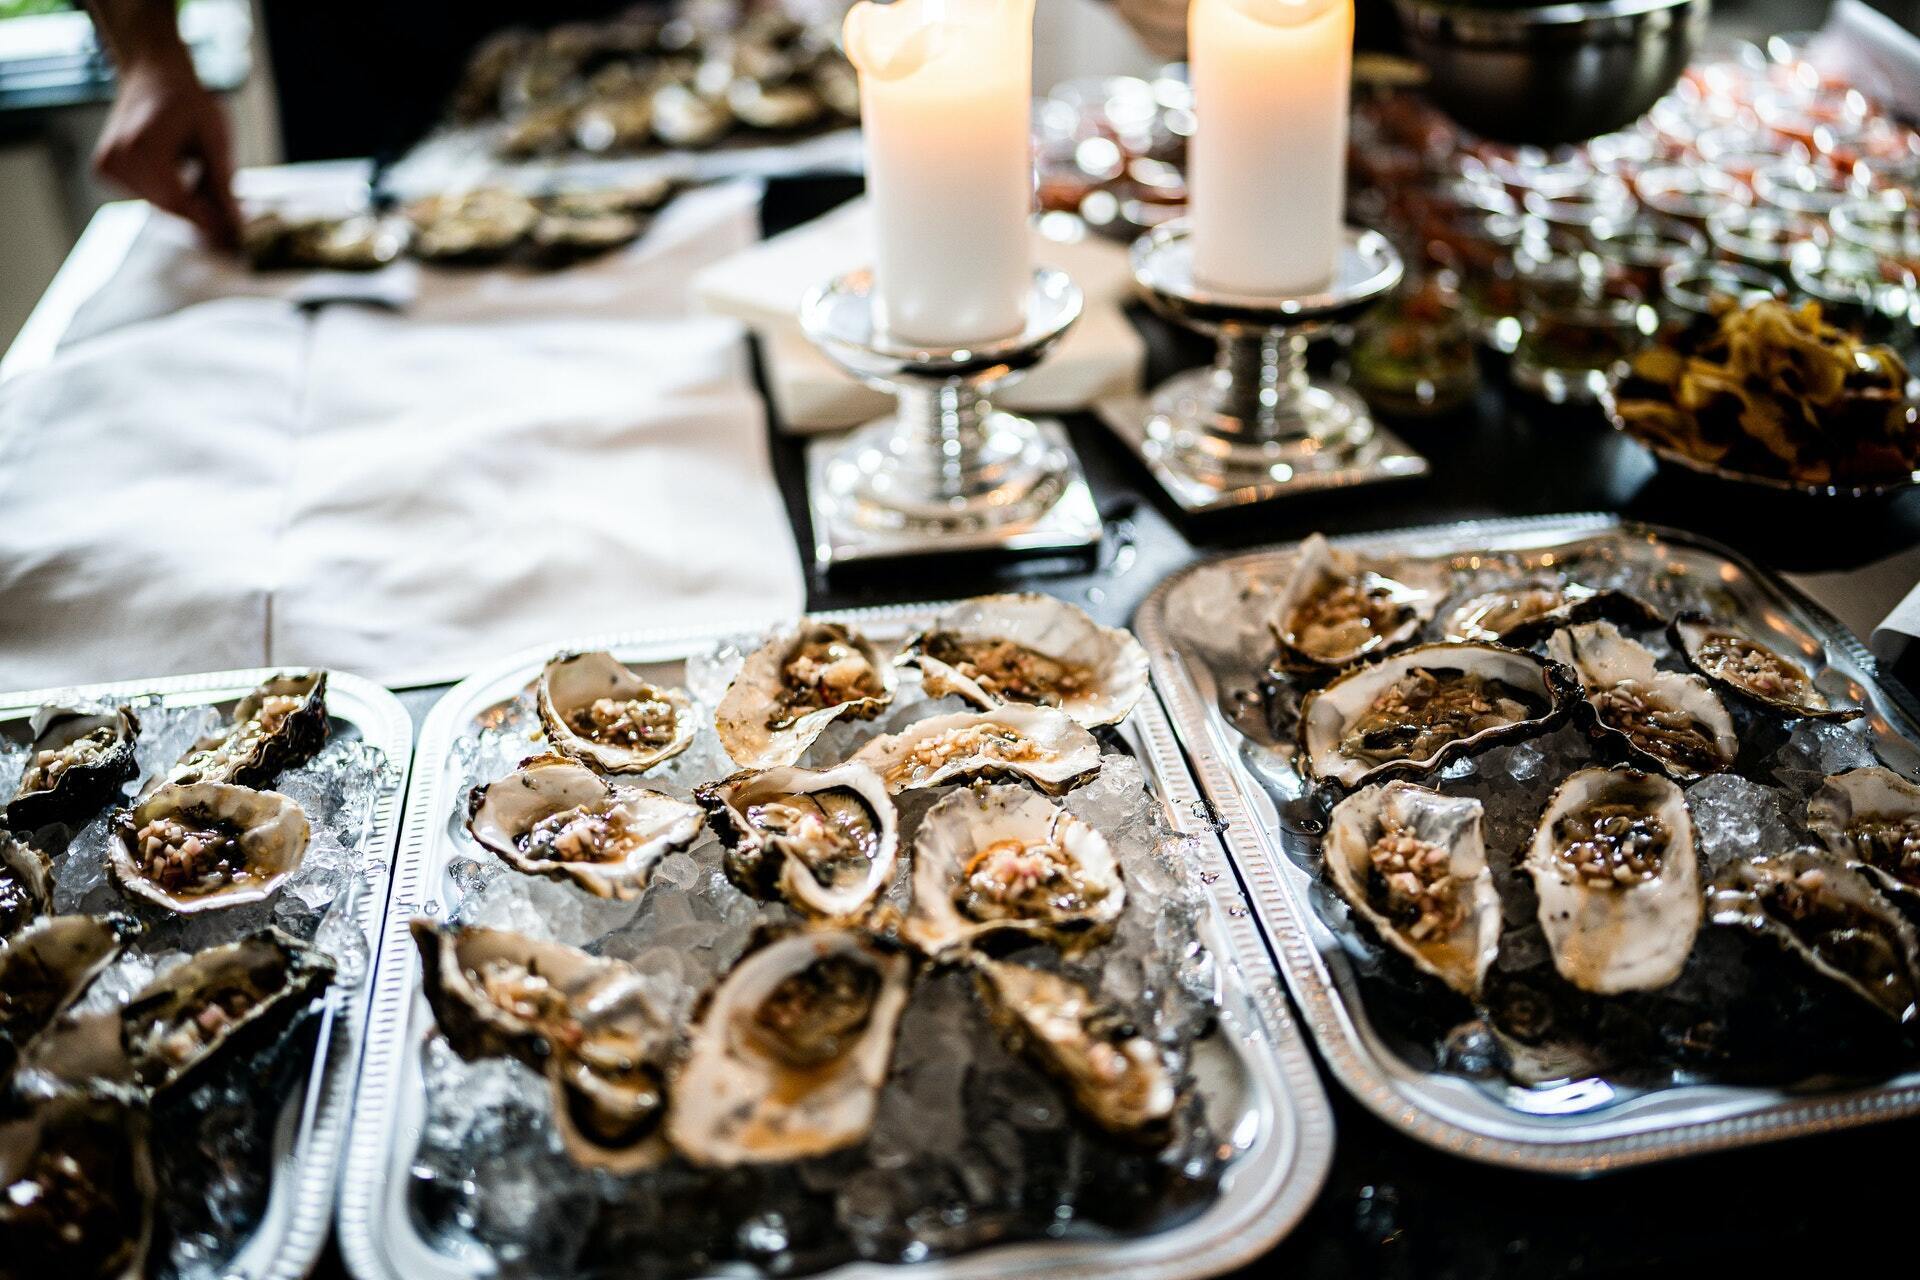 With oysters, you also need to be very careful, especially to pay attention to the smell and taste